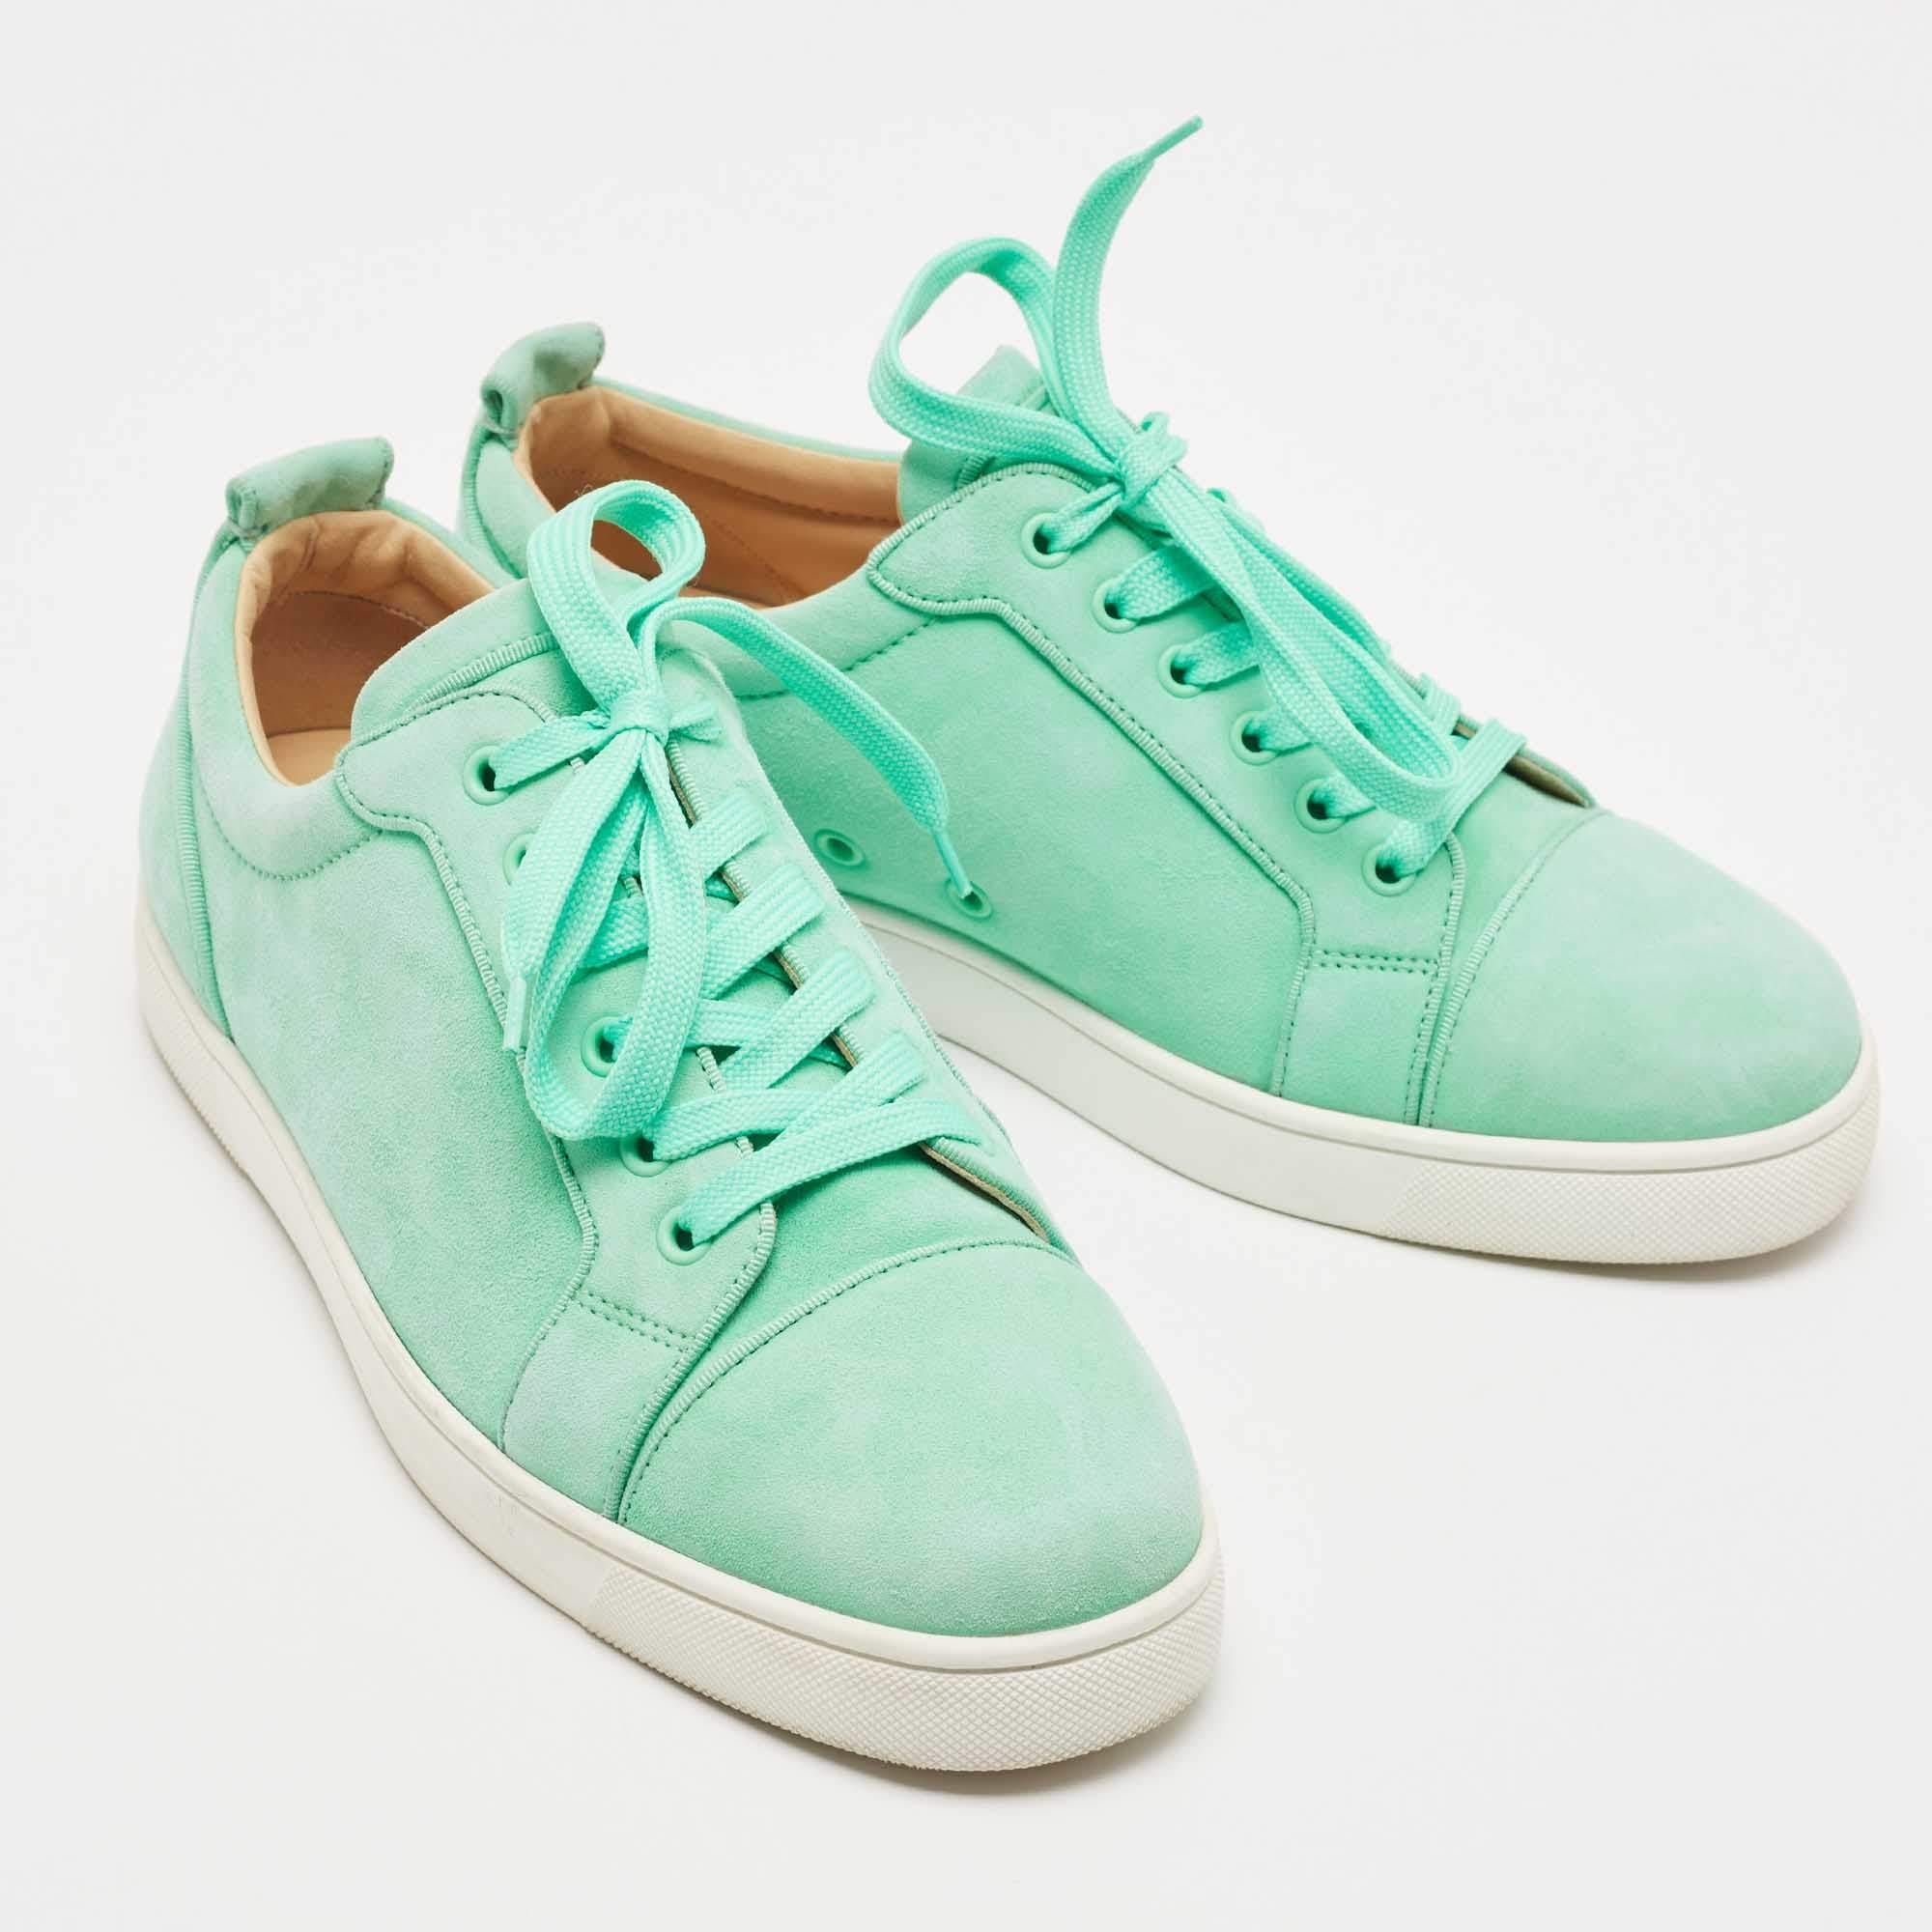 Christian Louboutin green Suede Rantulow Low Top Sneakers For Sale 1